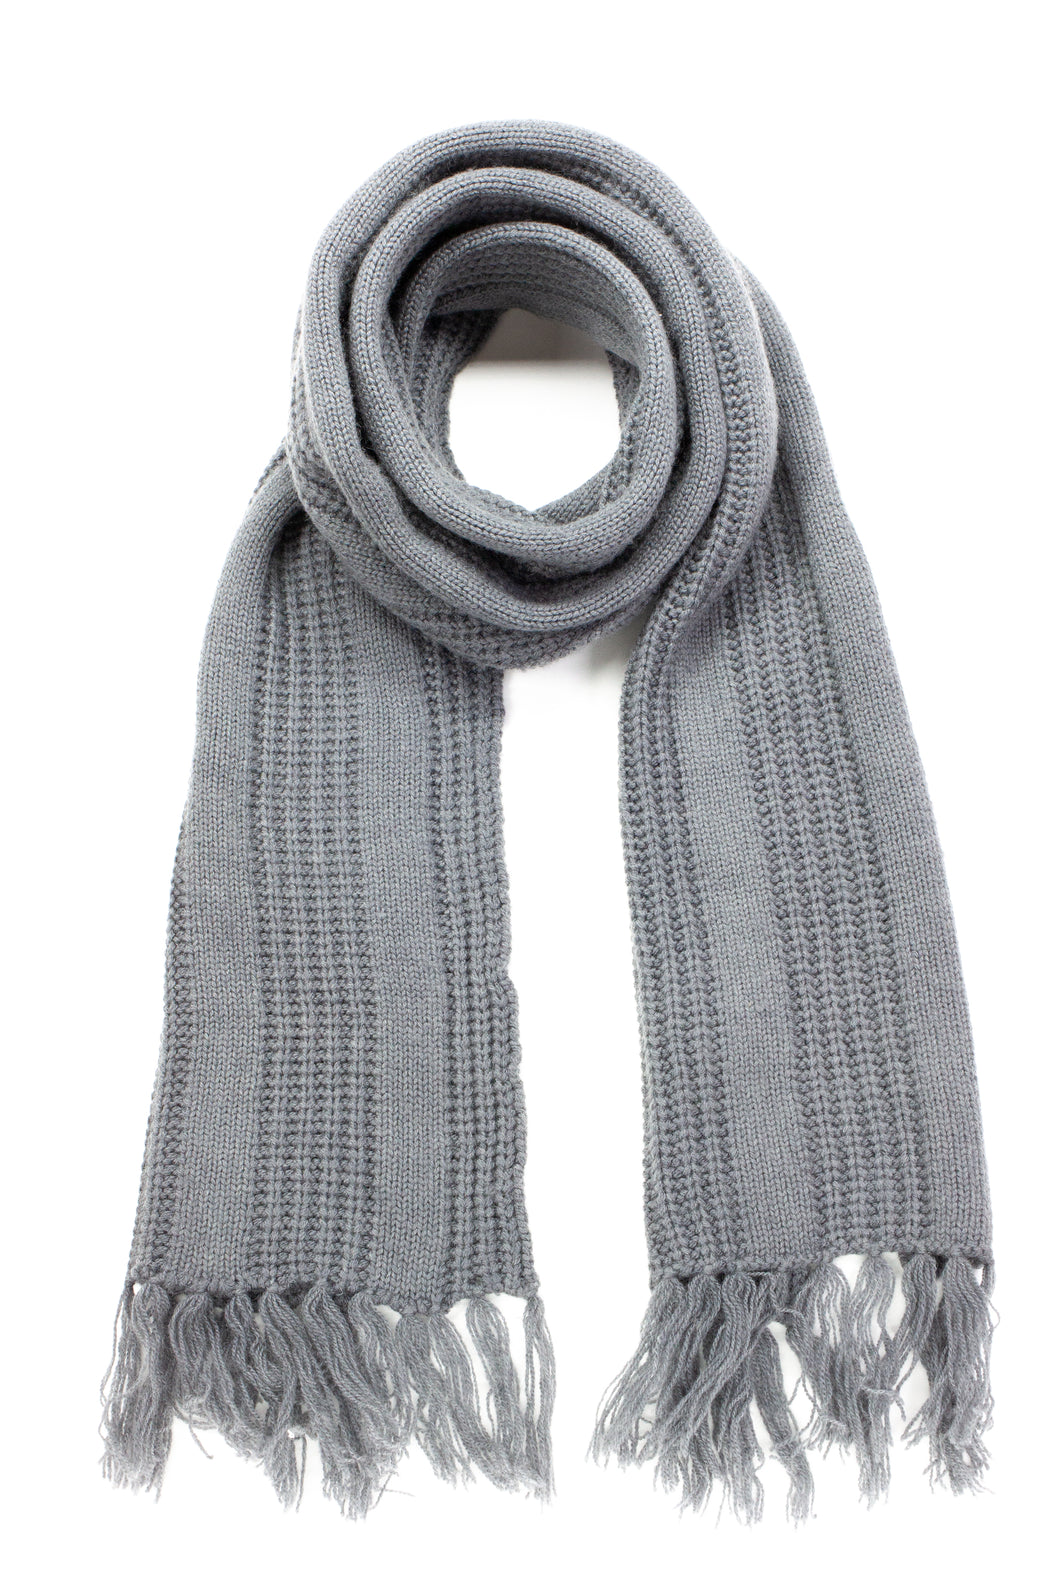 80% Wool 20% Cashmere Hand Crafted Long Winter Scarf Men